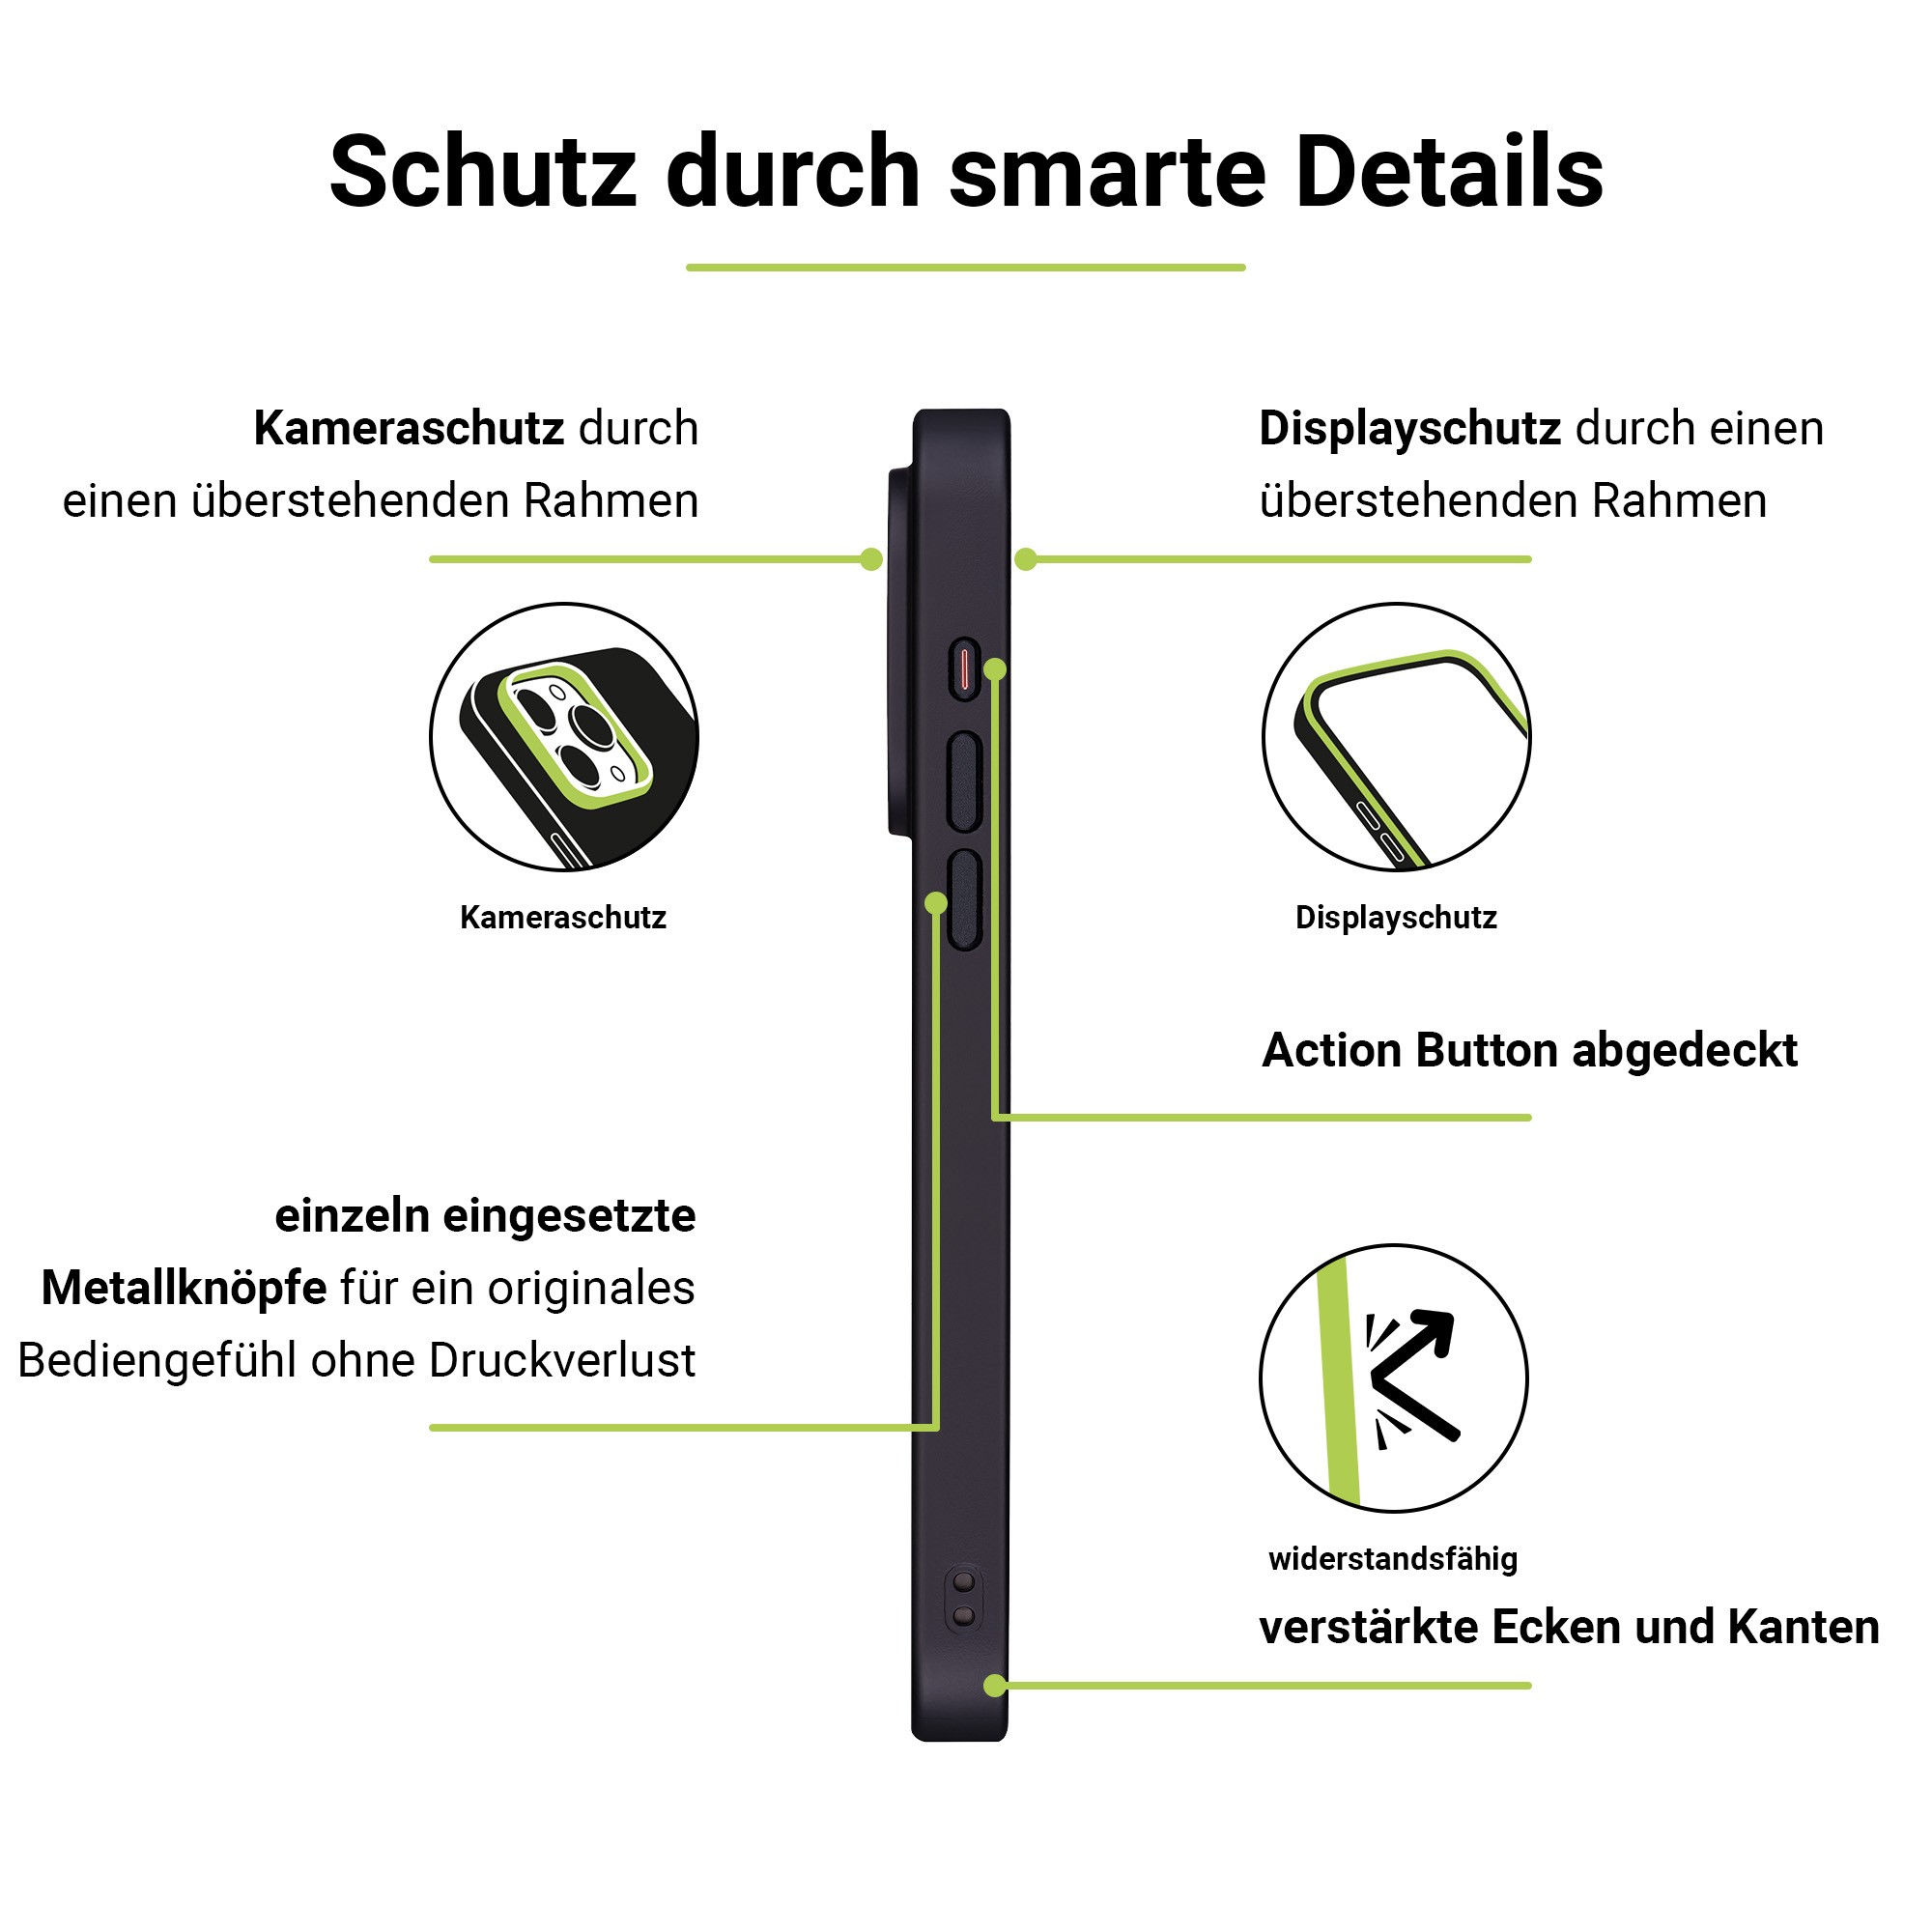 ARTWIZZ IcedClip +CHARGE, Backcover, Apple, 15 Pro Max, Schwarz iPhone